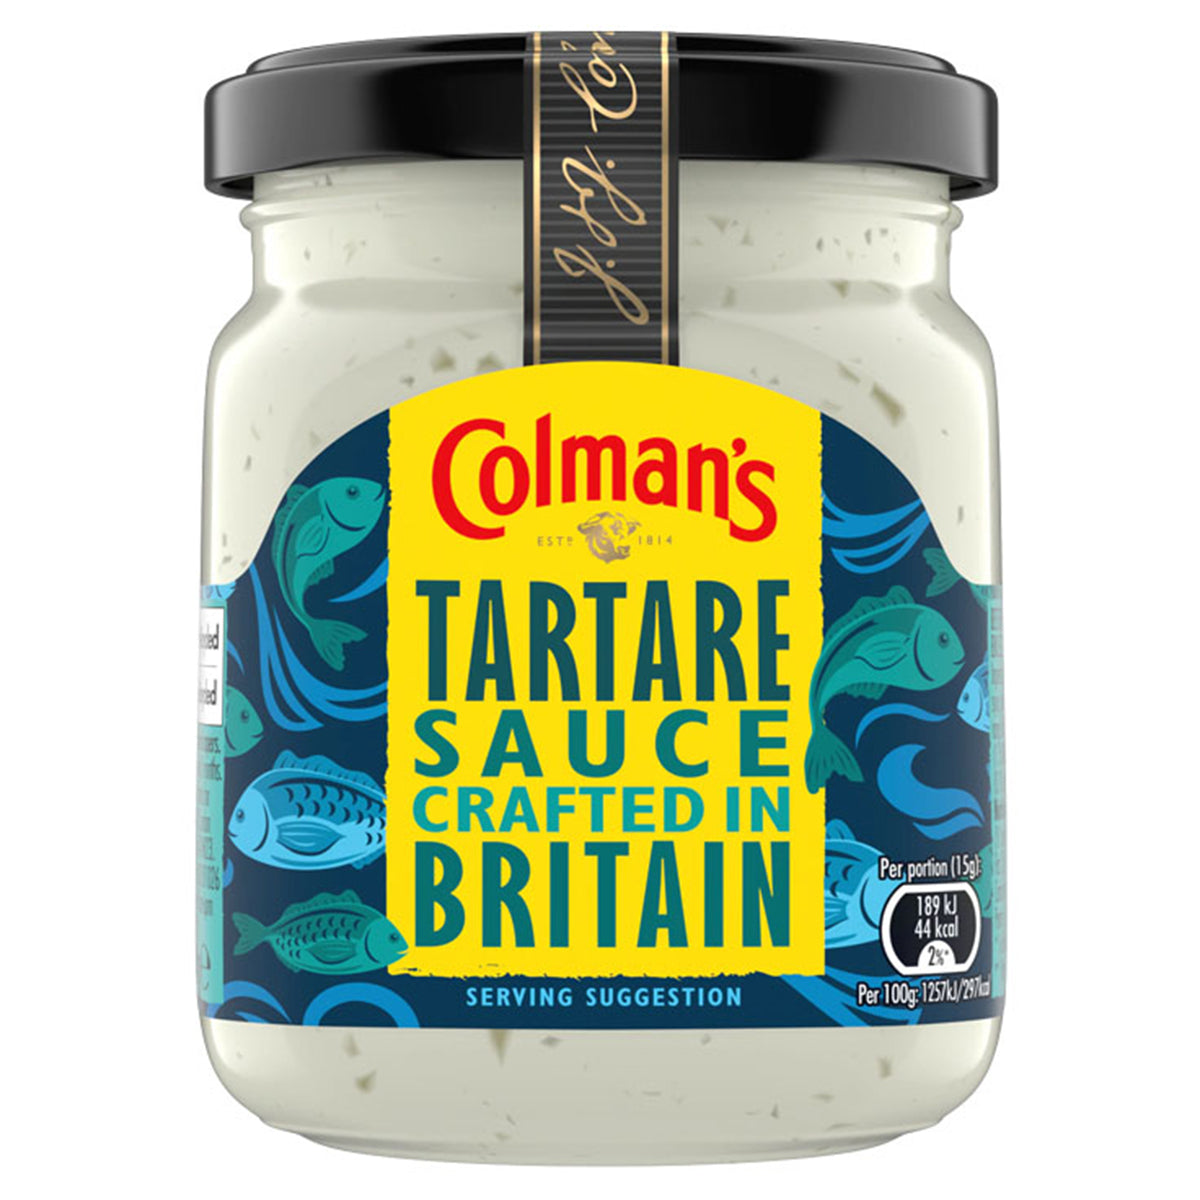 Colmans' Tartare Sauce crafted in Britain.